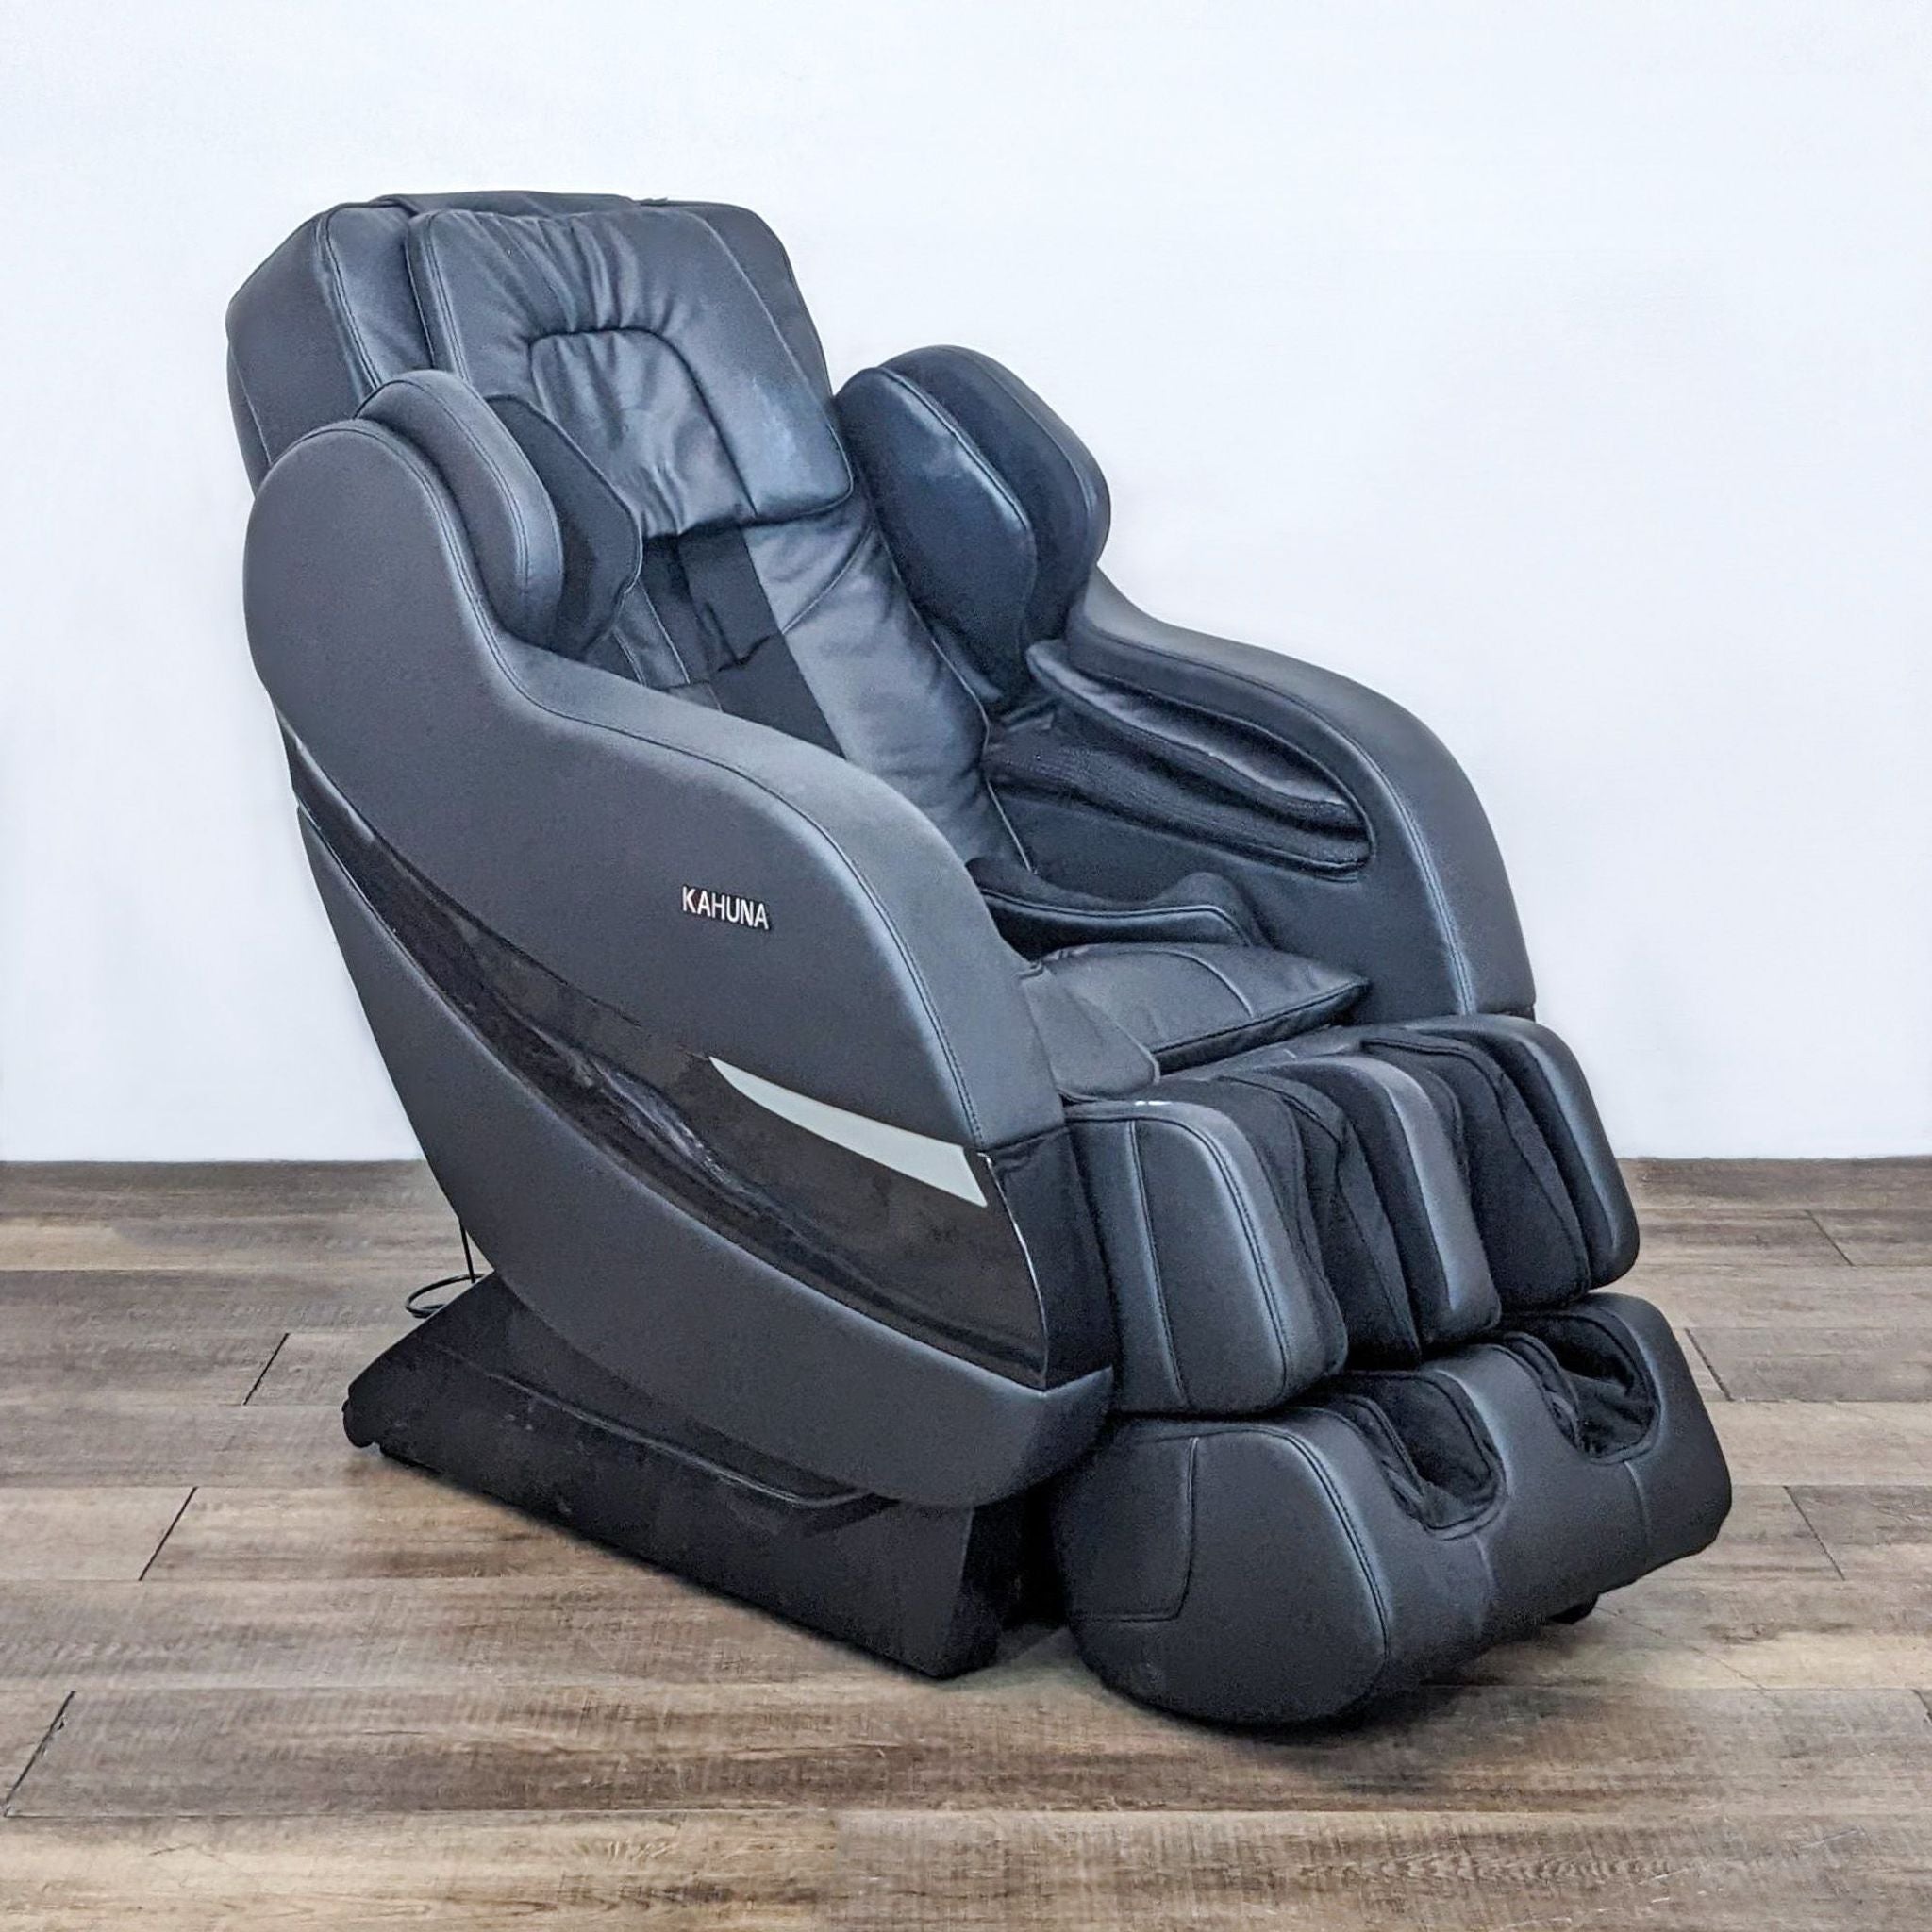 Kahuna SM-7300 full body massage chair with 9 auto programs, stretching, heat therapy, zero gravity, double leg extension, and space-saving design.